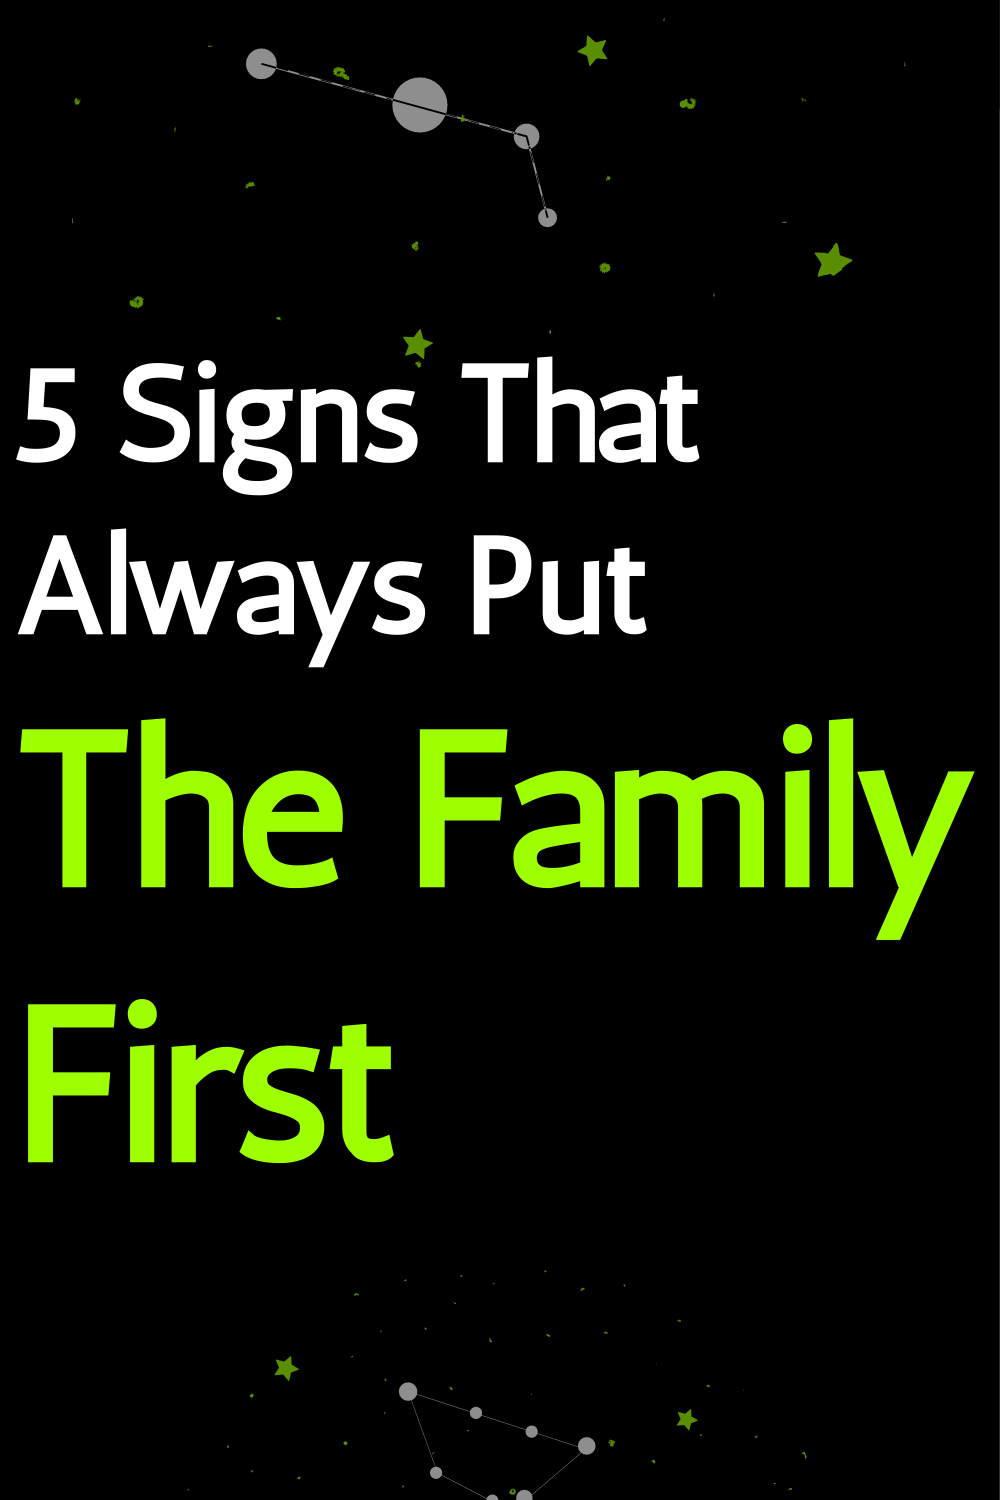 5 Signs That Always Put The Family First